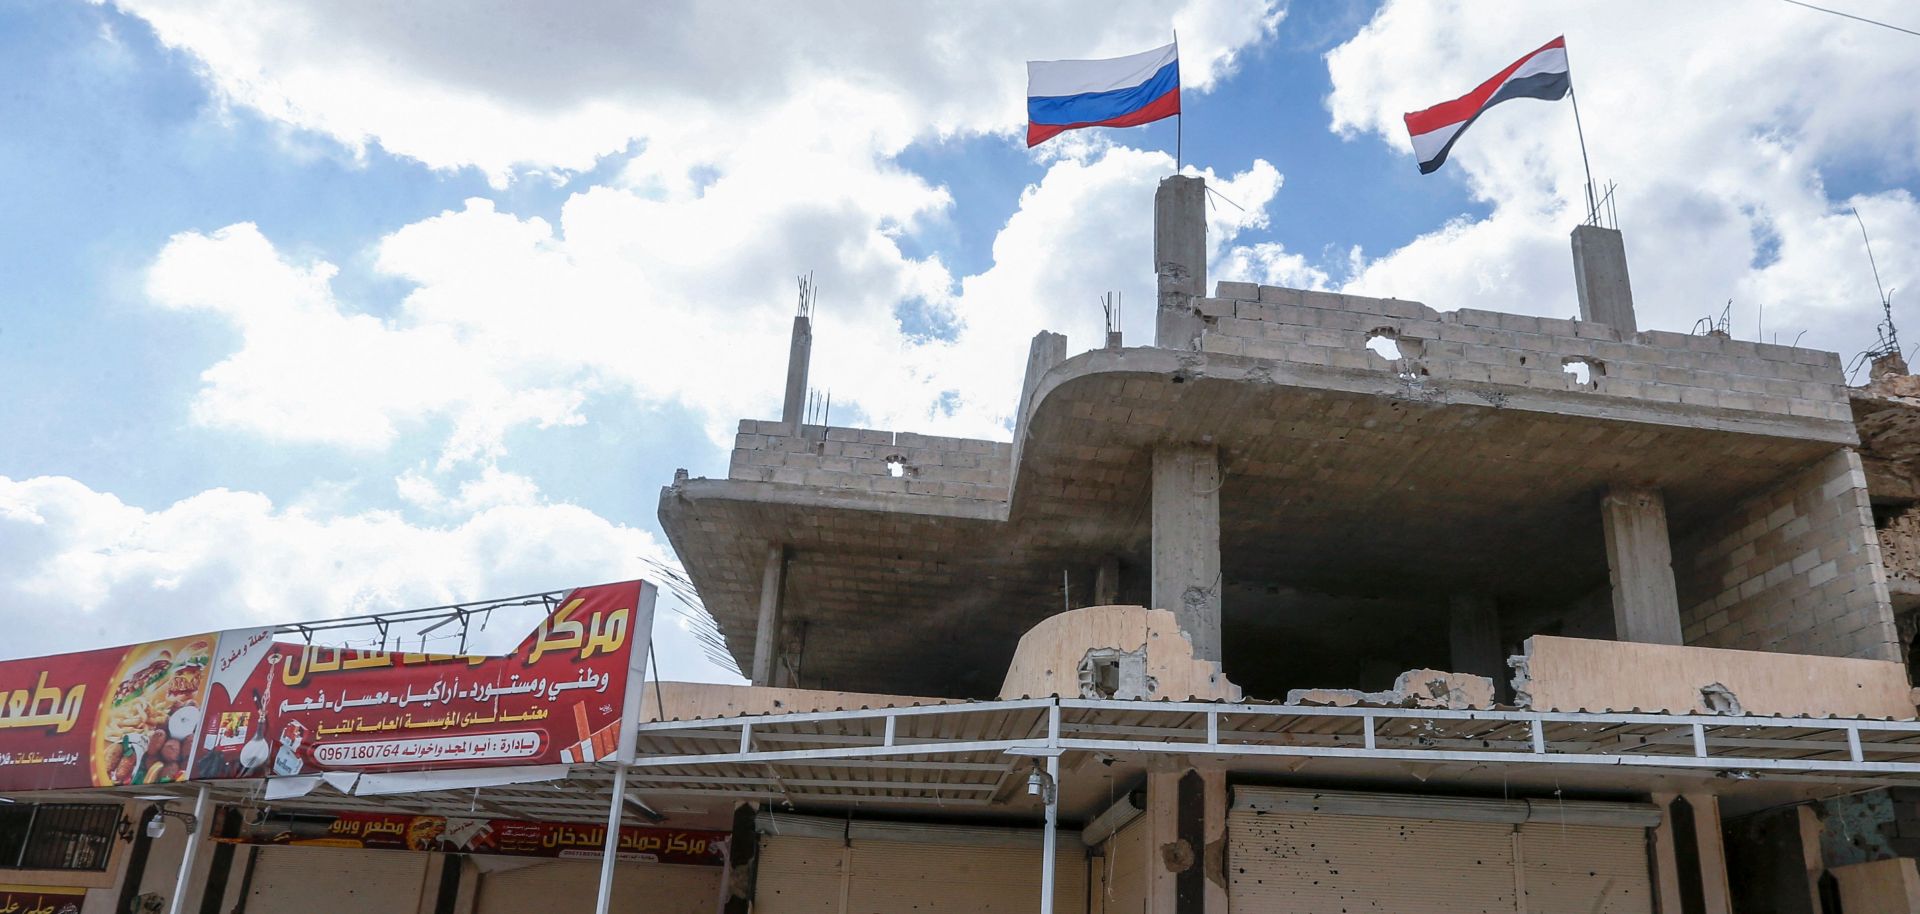 Russian and Syrian flags wave above a damaged building in Syria's southern city of Daraa on Sept. 12, 2021.